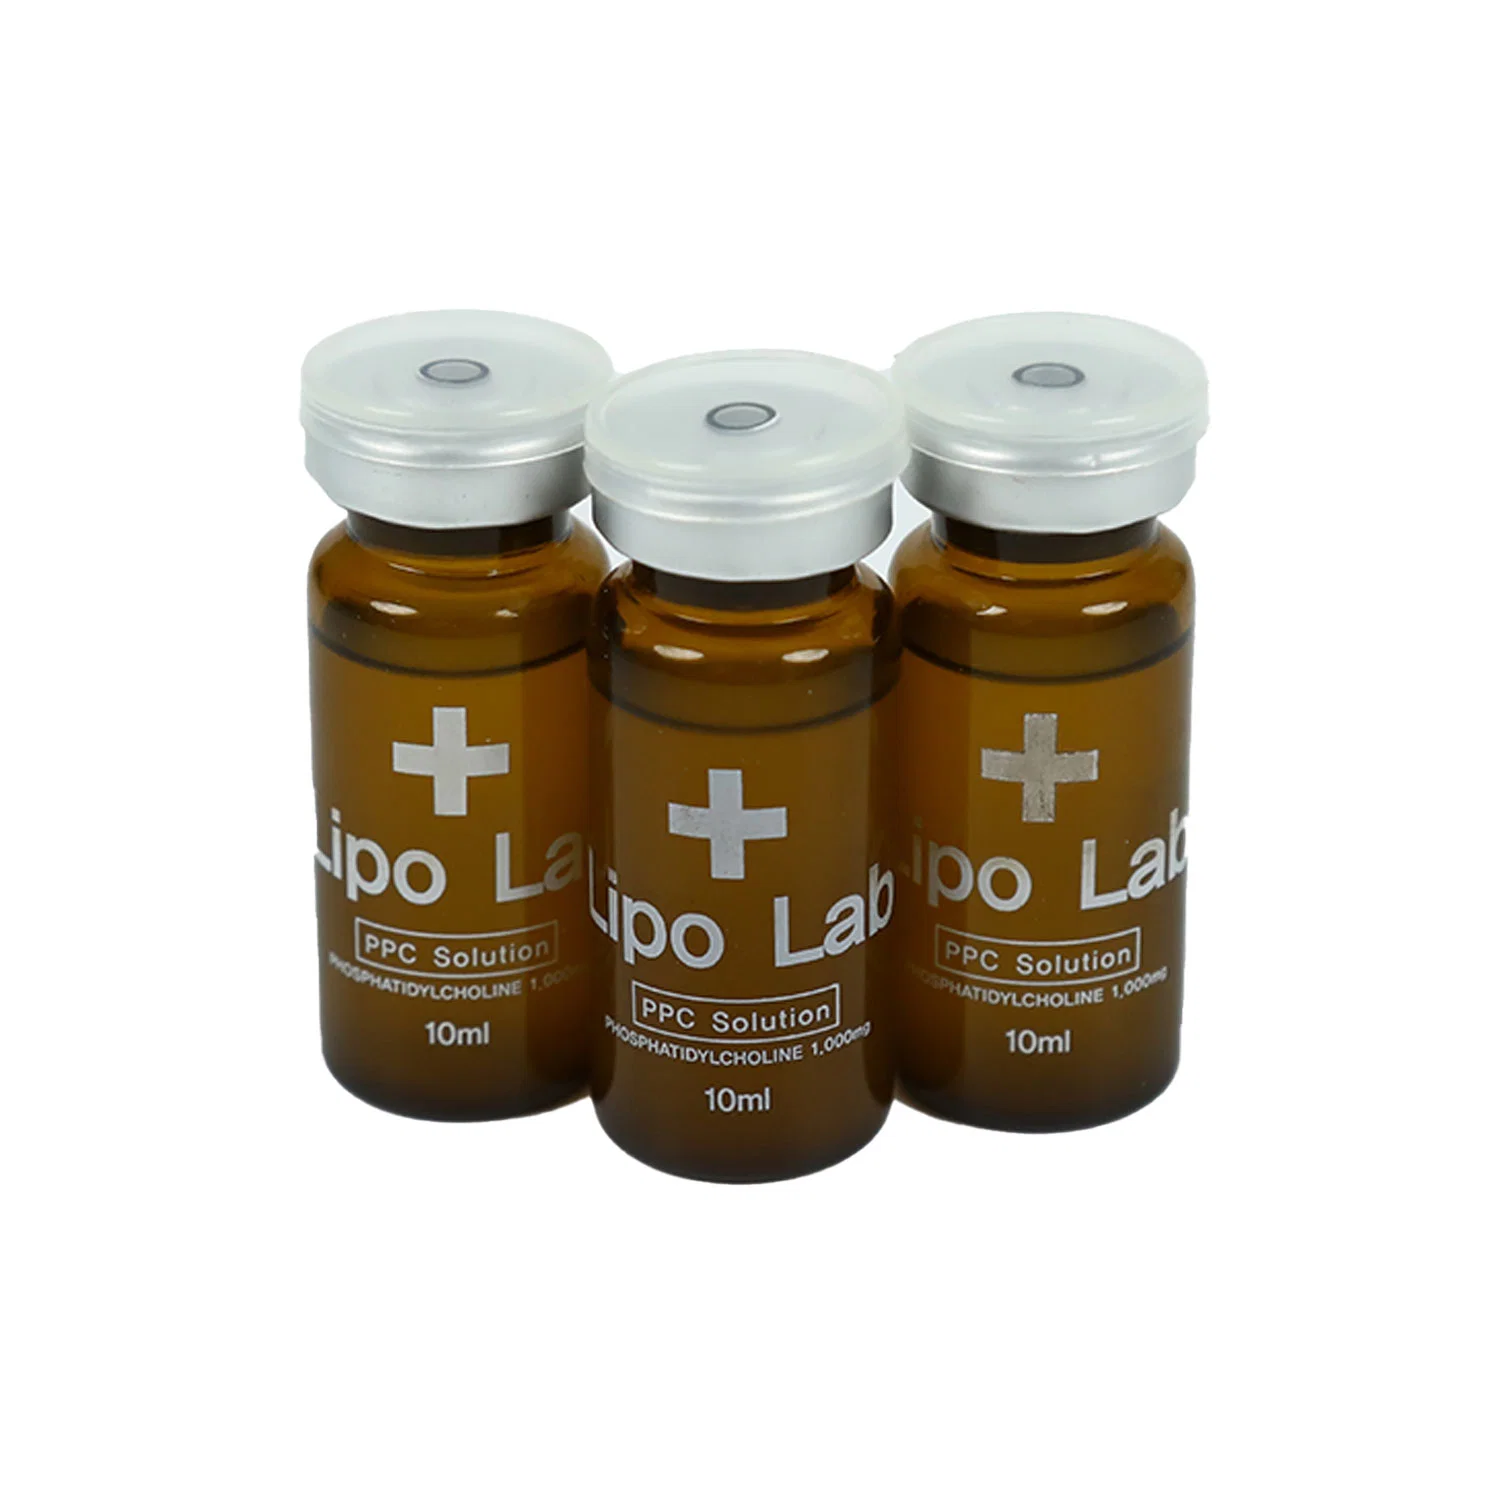 Lipo Lab Korea Hot Selling Weight Loss Slimming Products for Sale